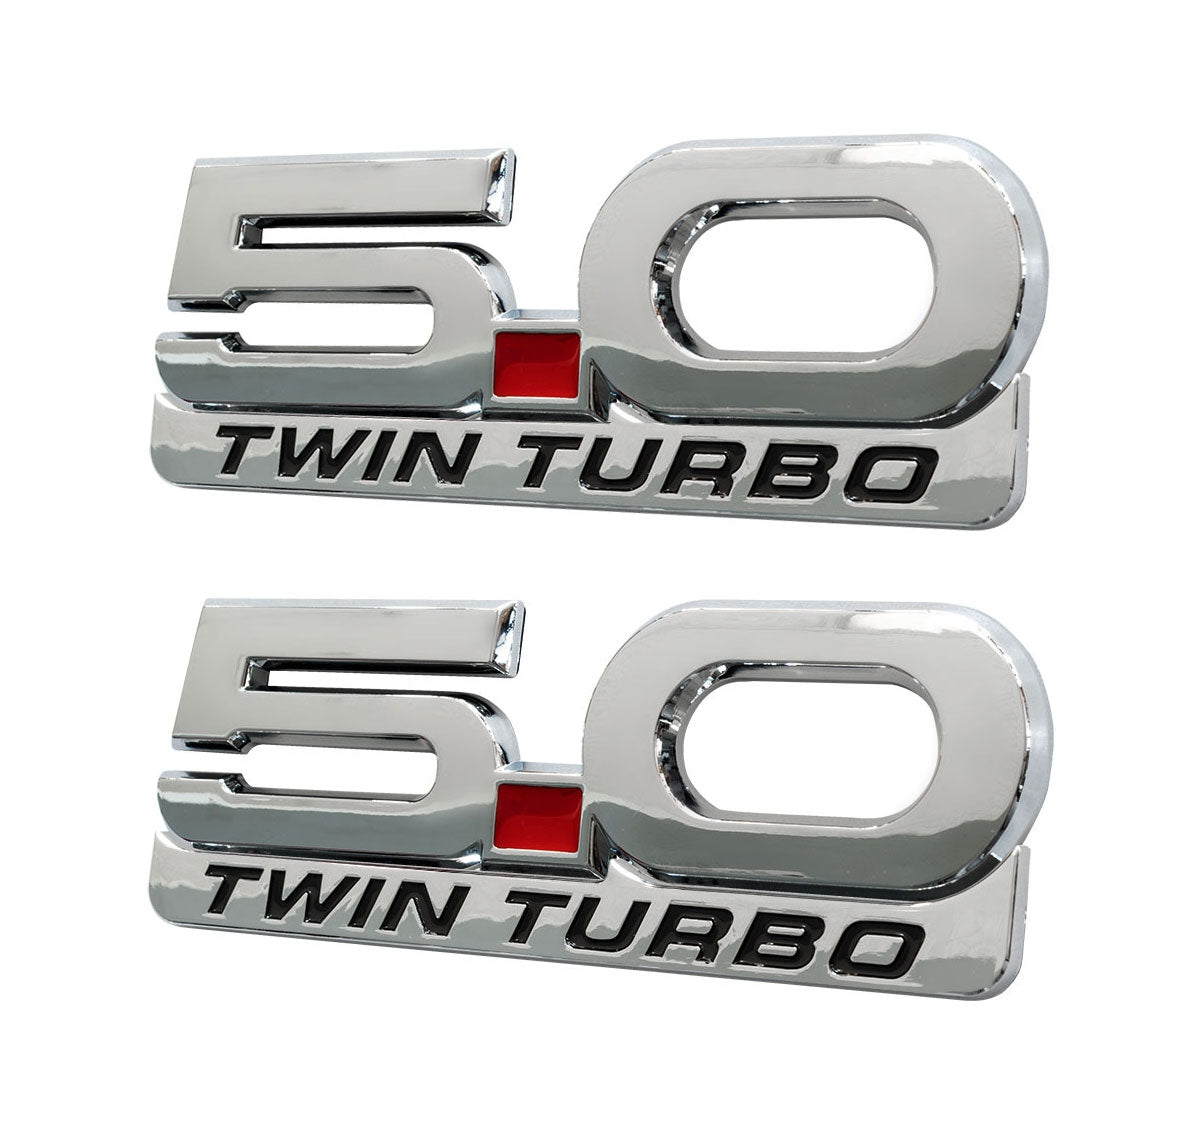 1979-2022 Mustang 5.0 Twin Turbo 5.25" Chrome Fender Emblems w/ Accent Badge 4pc